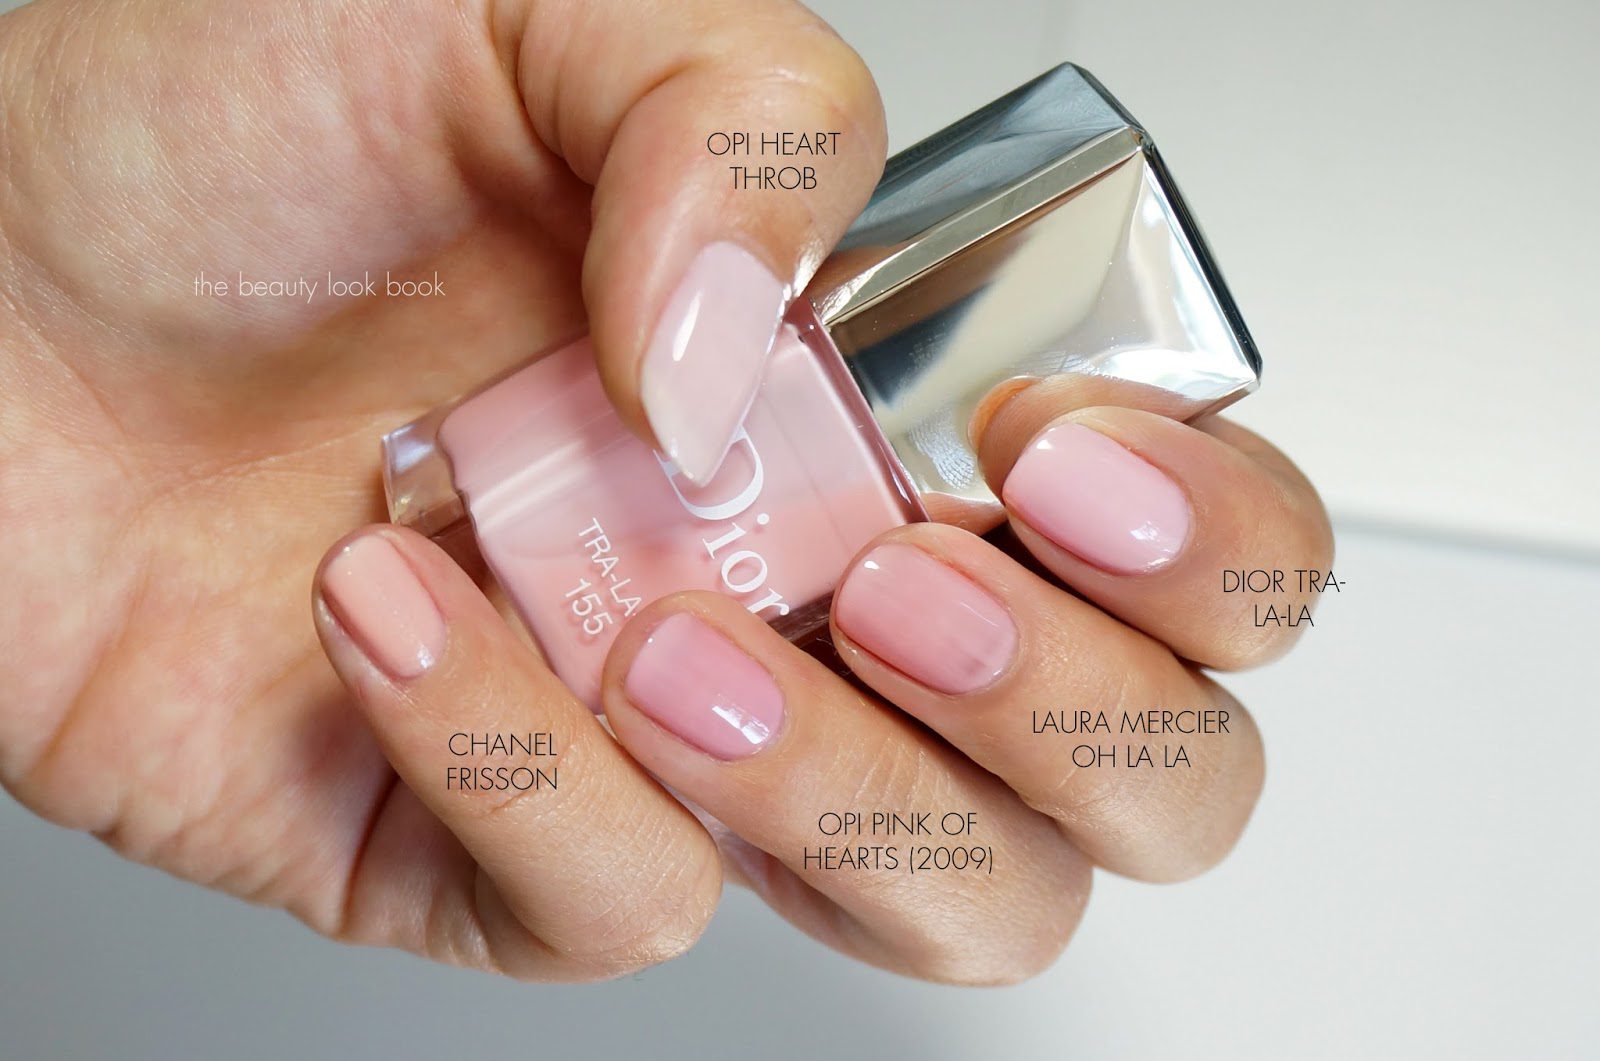 1. Dior Vernis Nail Polish in "Lucky" - wide 2